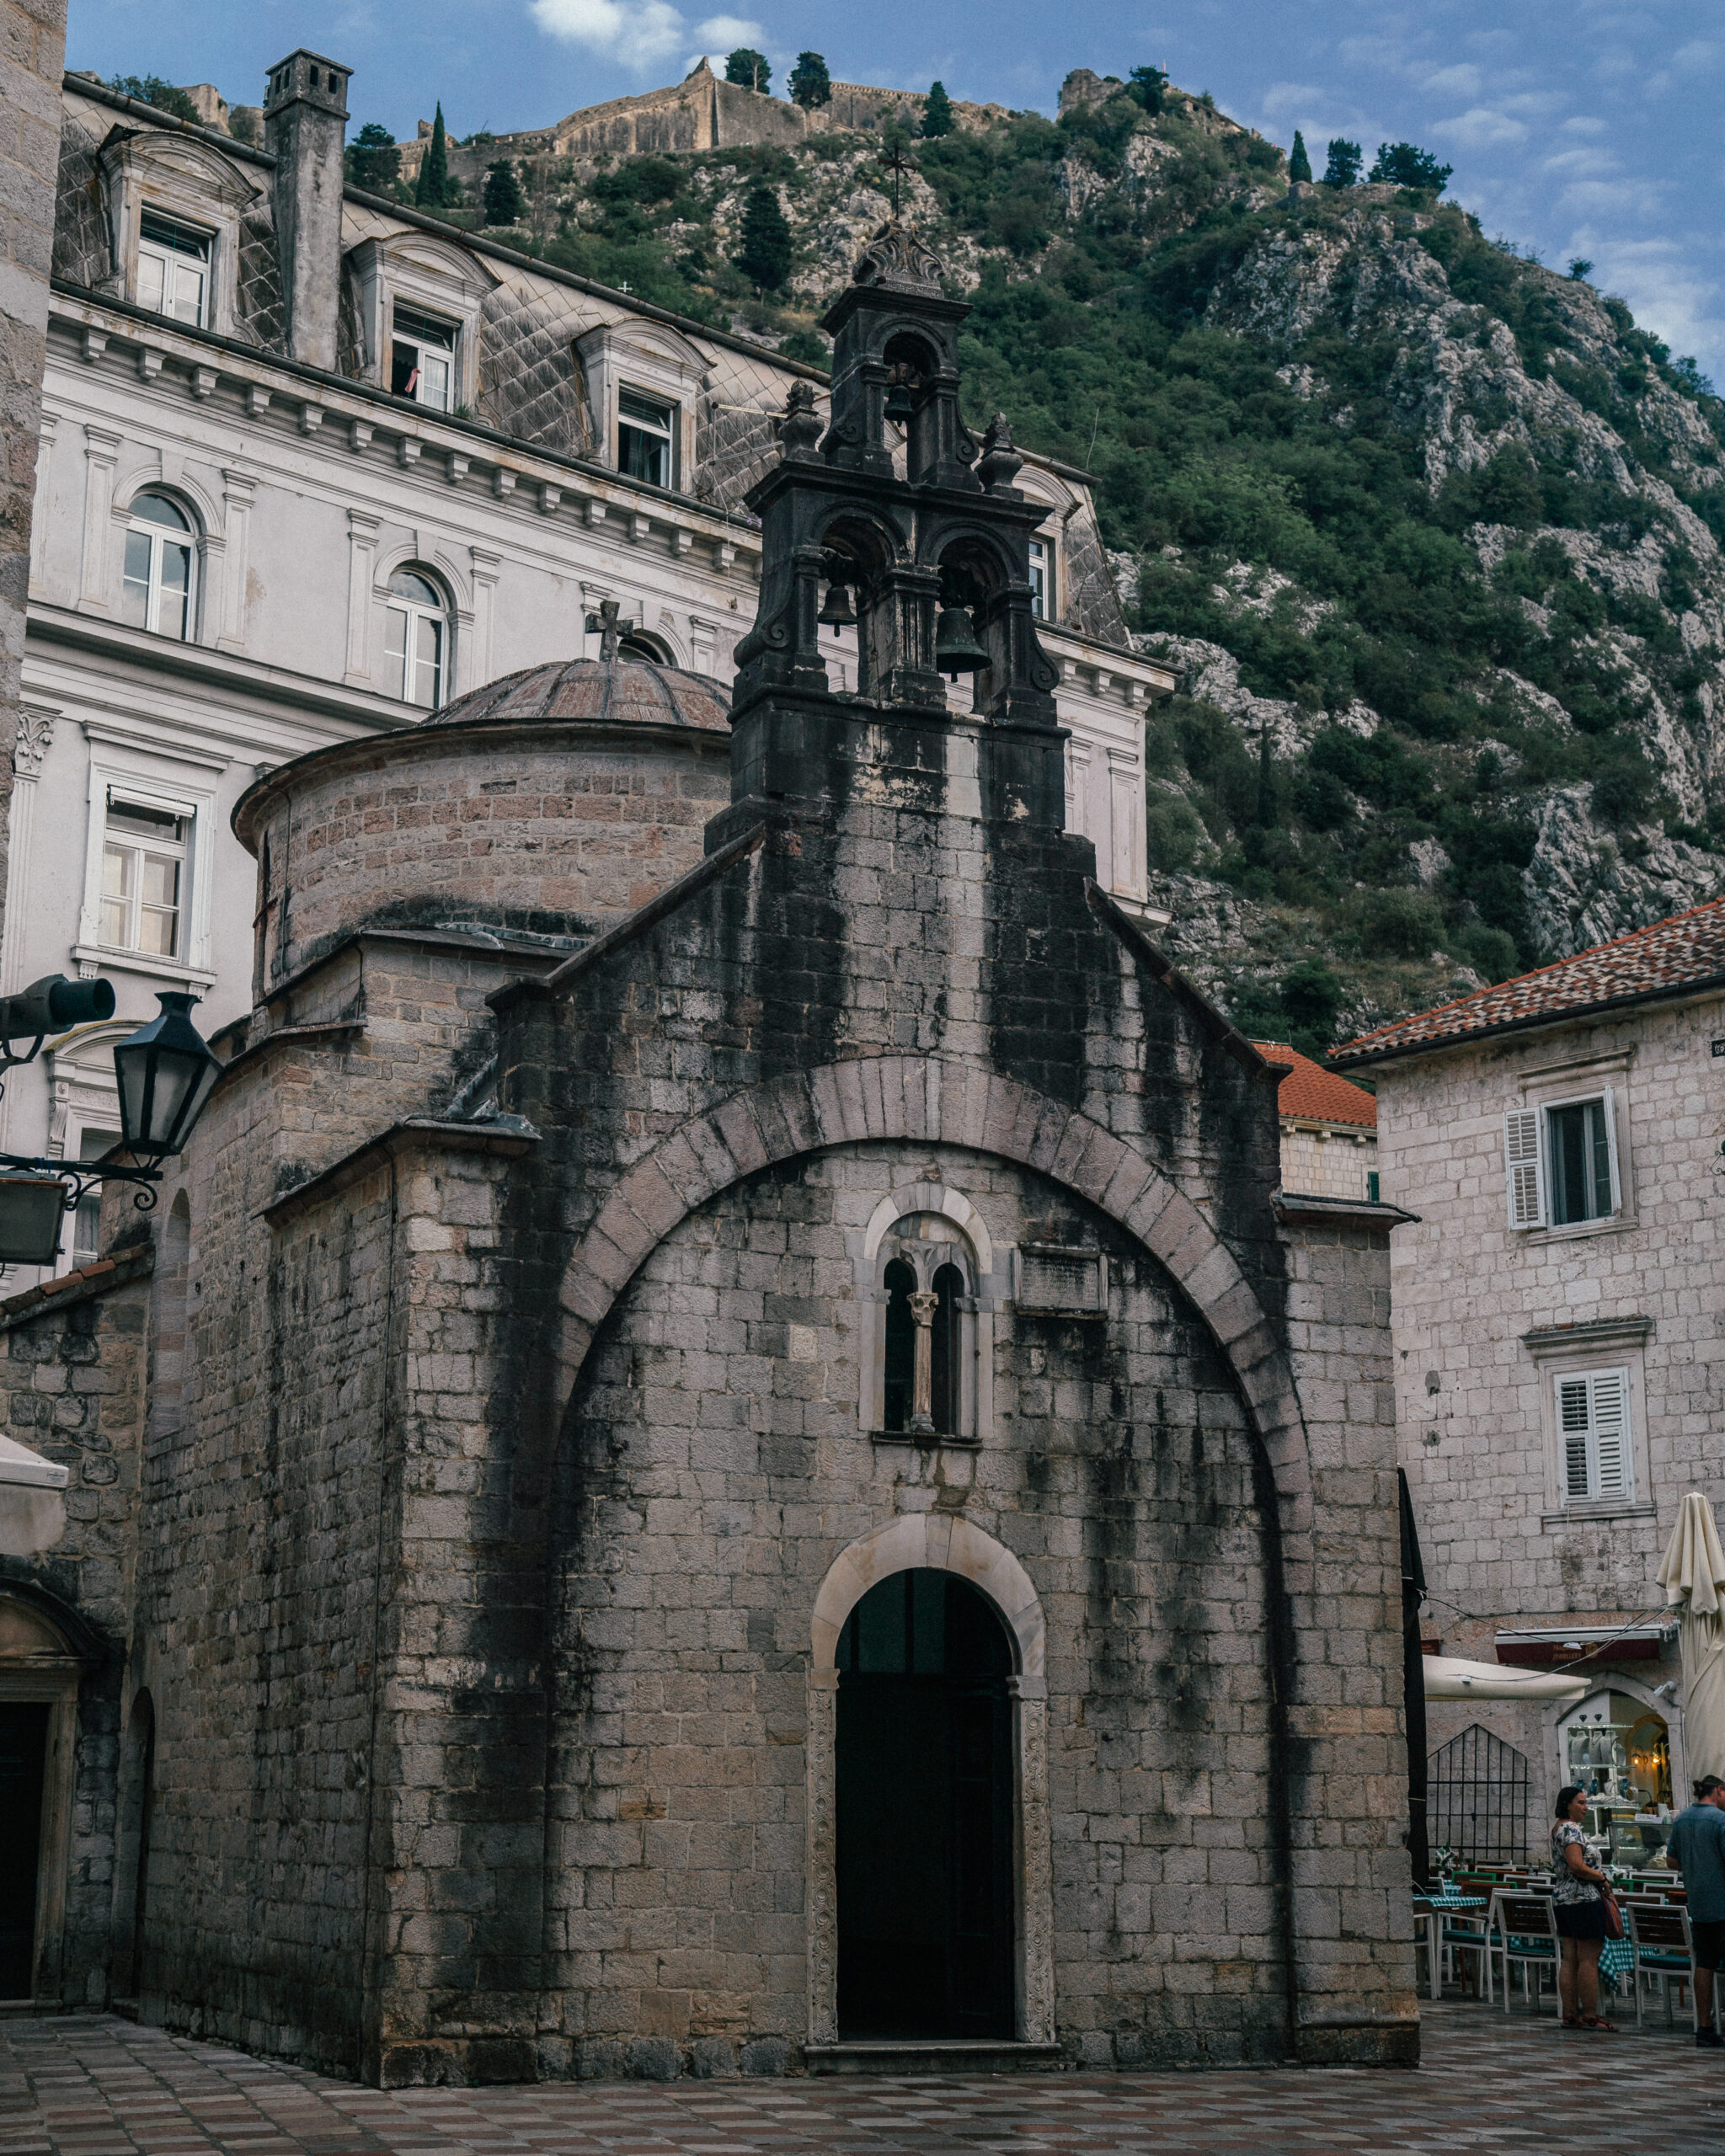 A complete travel guide to Monteregro's Bay of Kotor including the best towns, beaches, hikes and hotels in Kotor, Budva and Sveti Stefan.